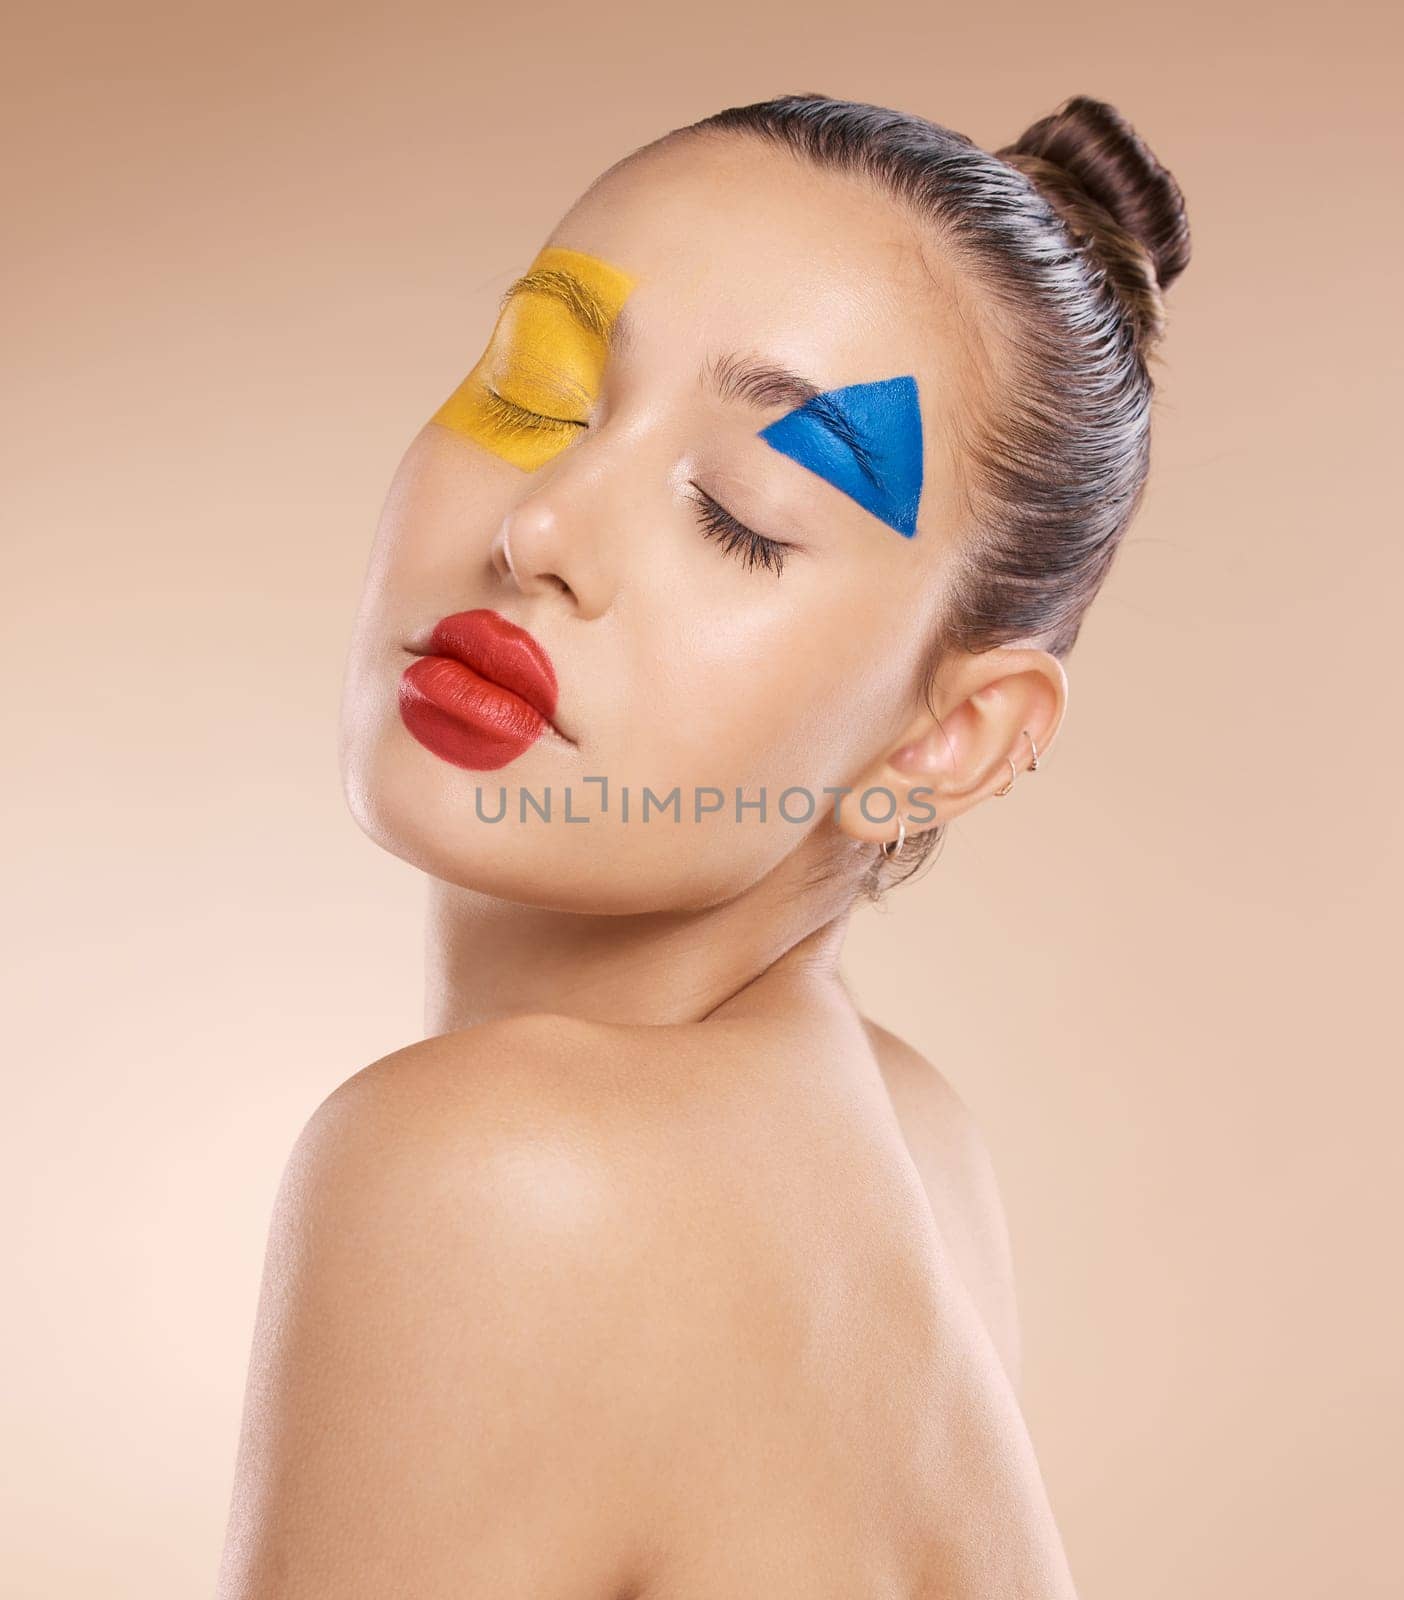 Woman, creative clown makeup on face and close eyes expression. Portrait of beauty cosmetic skincare model, circus or fantasy abstract facial paint and art design against orange studio background.